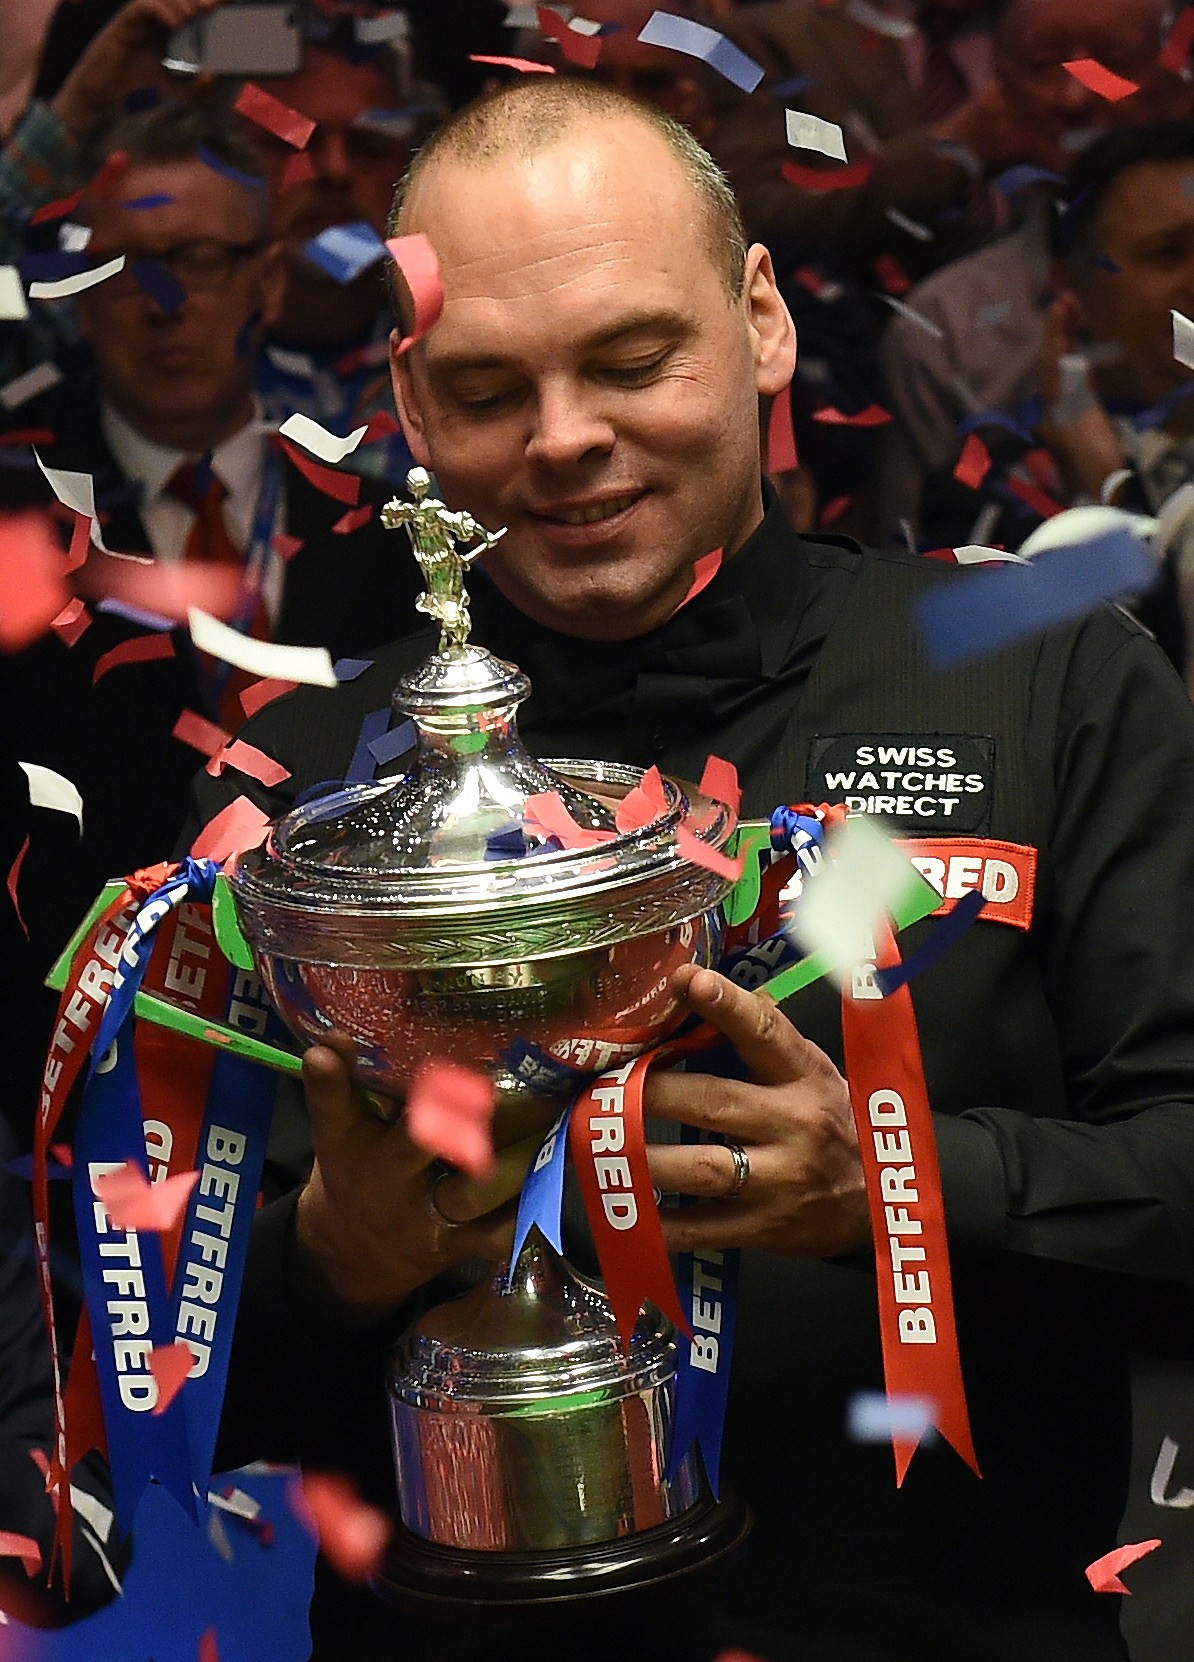 Stuart Bingham was crowned as world champion in 2015 ©Getty Images
